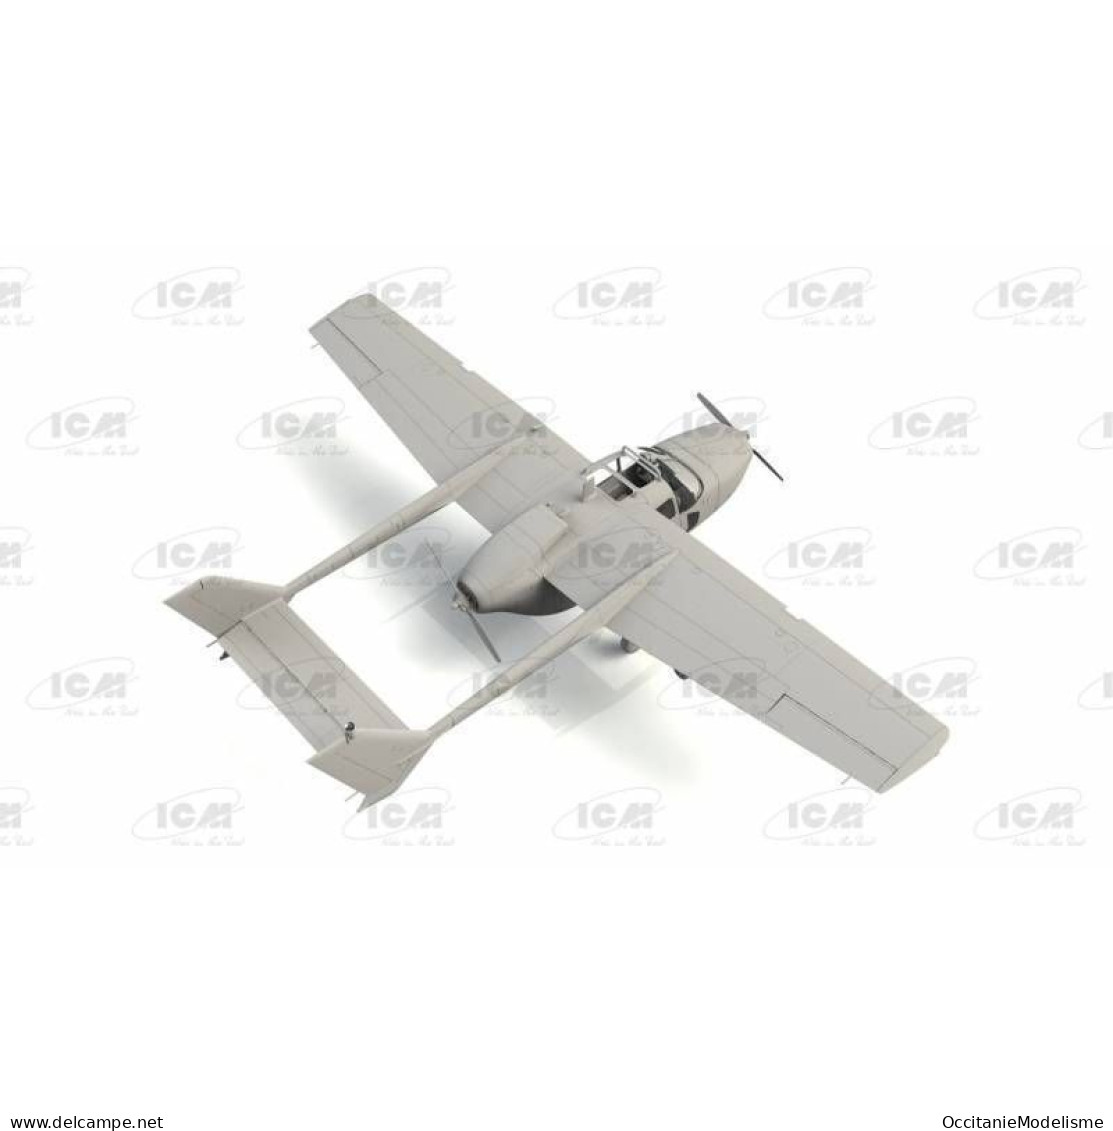 ICM - CESSNA O-2A Skymaster US Navy Service Maquette Kit Plastique Réf. 48291 Neuf NBO 1/48 - Airplanes